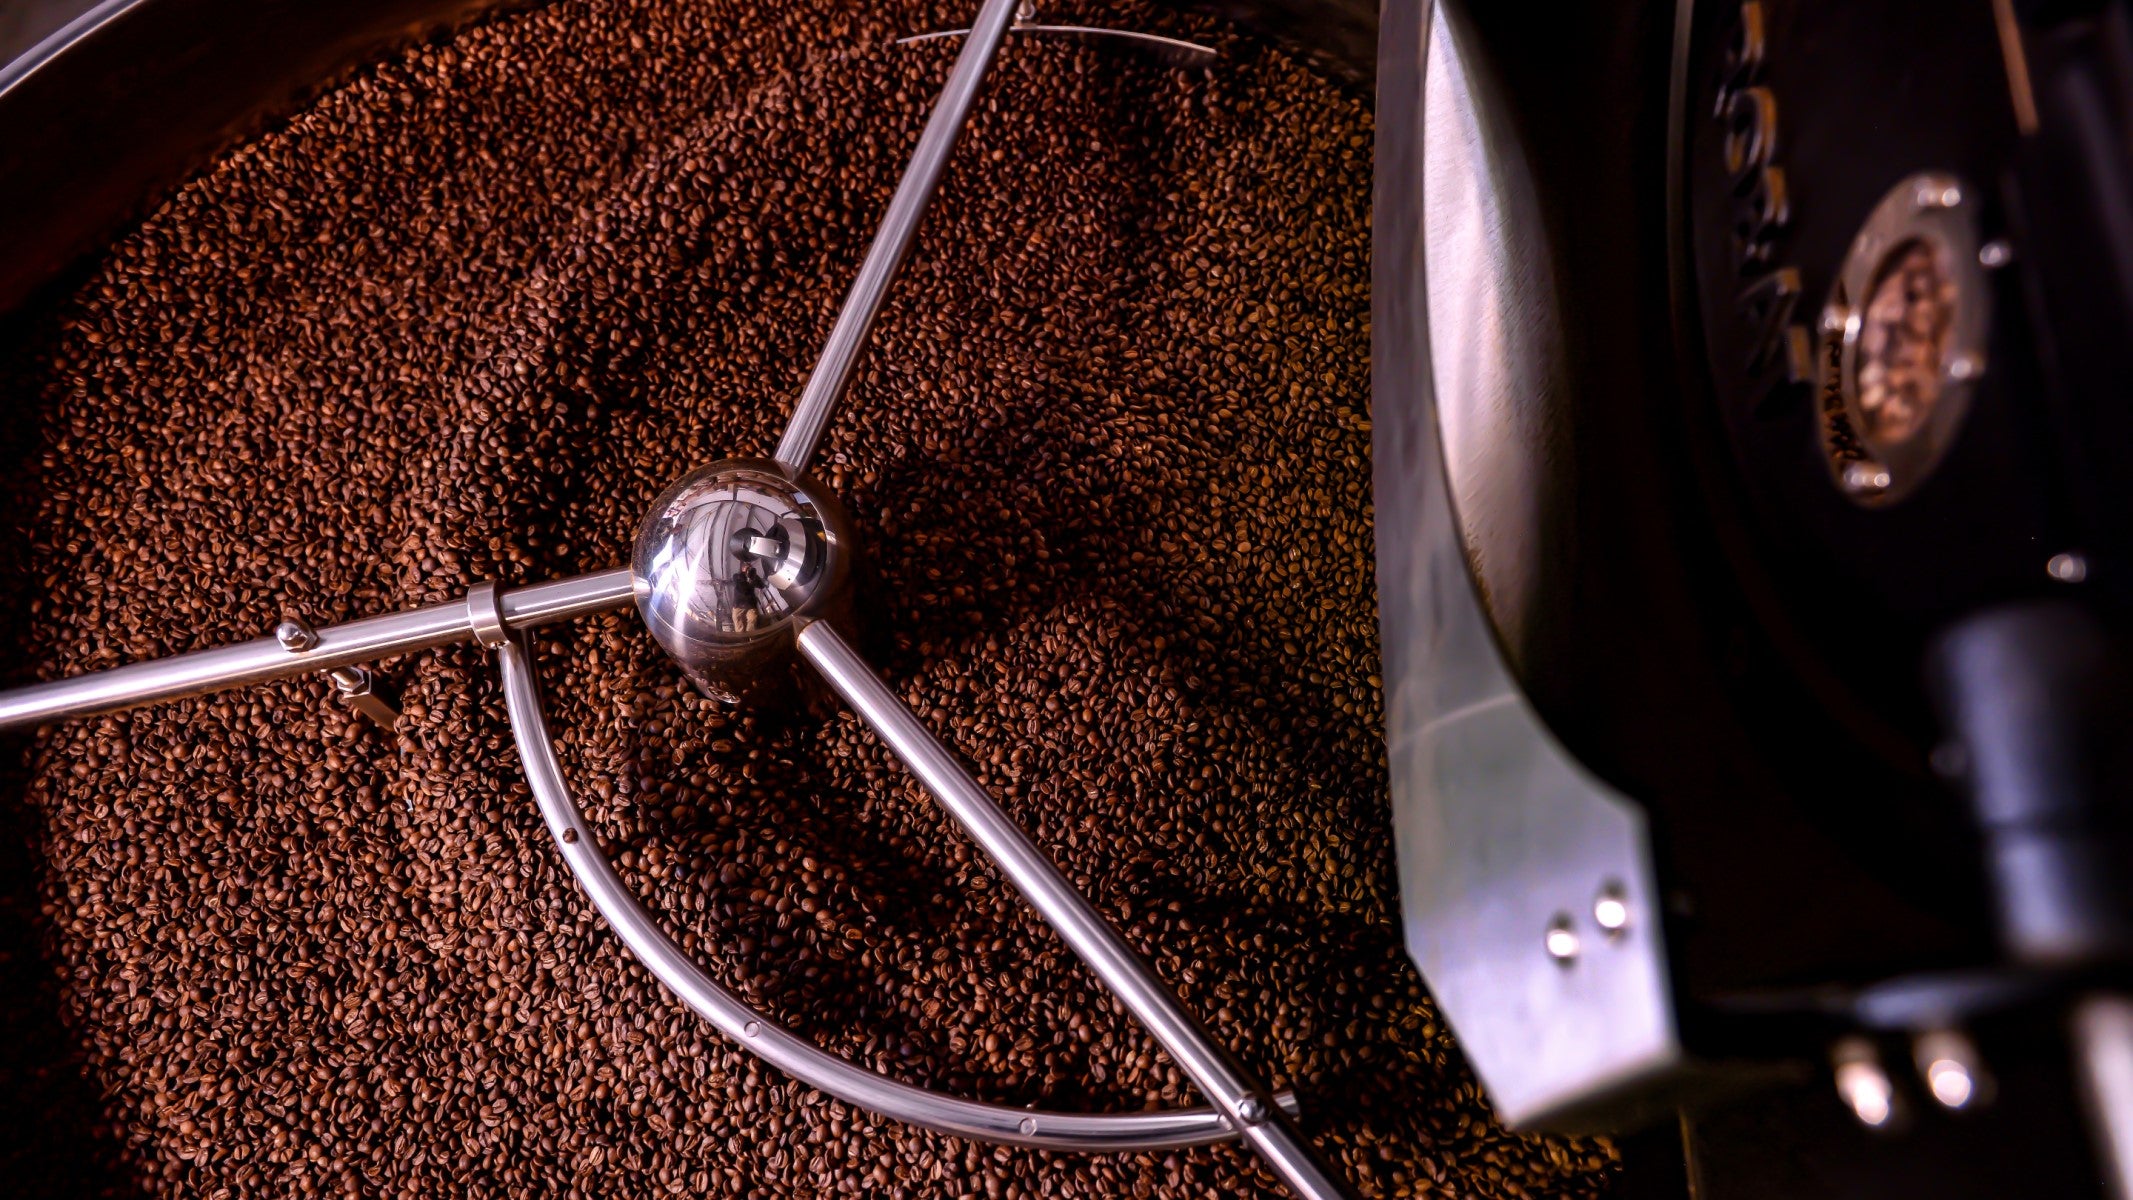 A shot of the Glen Lyon Coffee Roasters' Probat speciality coffee roasting machine from above with coffee in the cooling tray